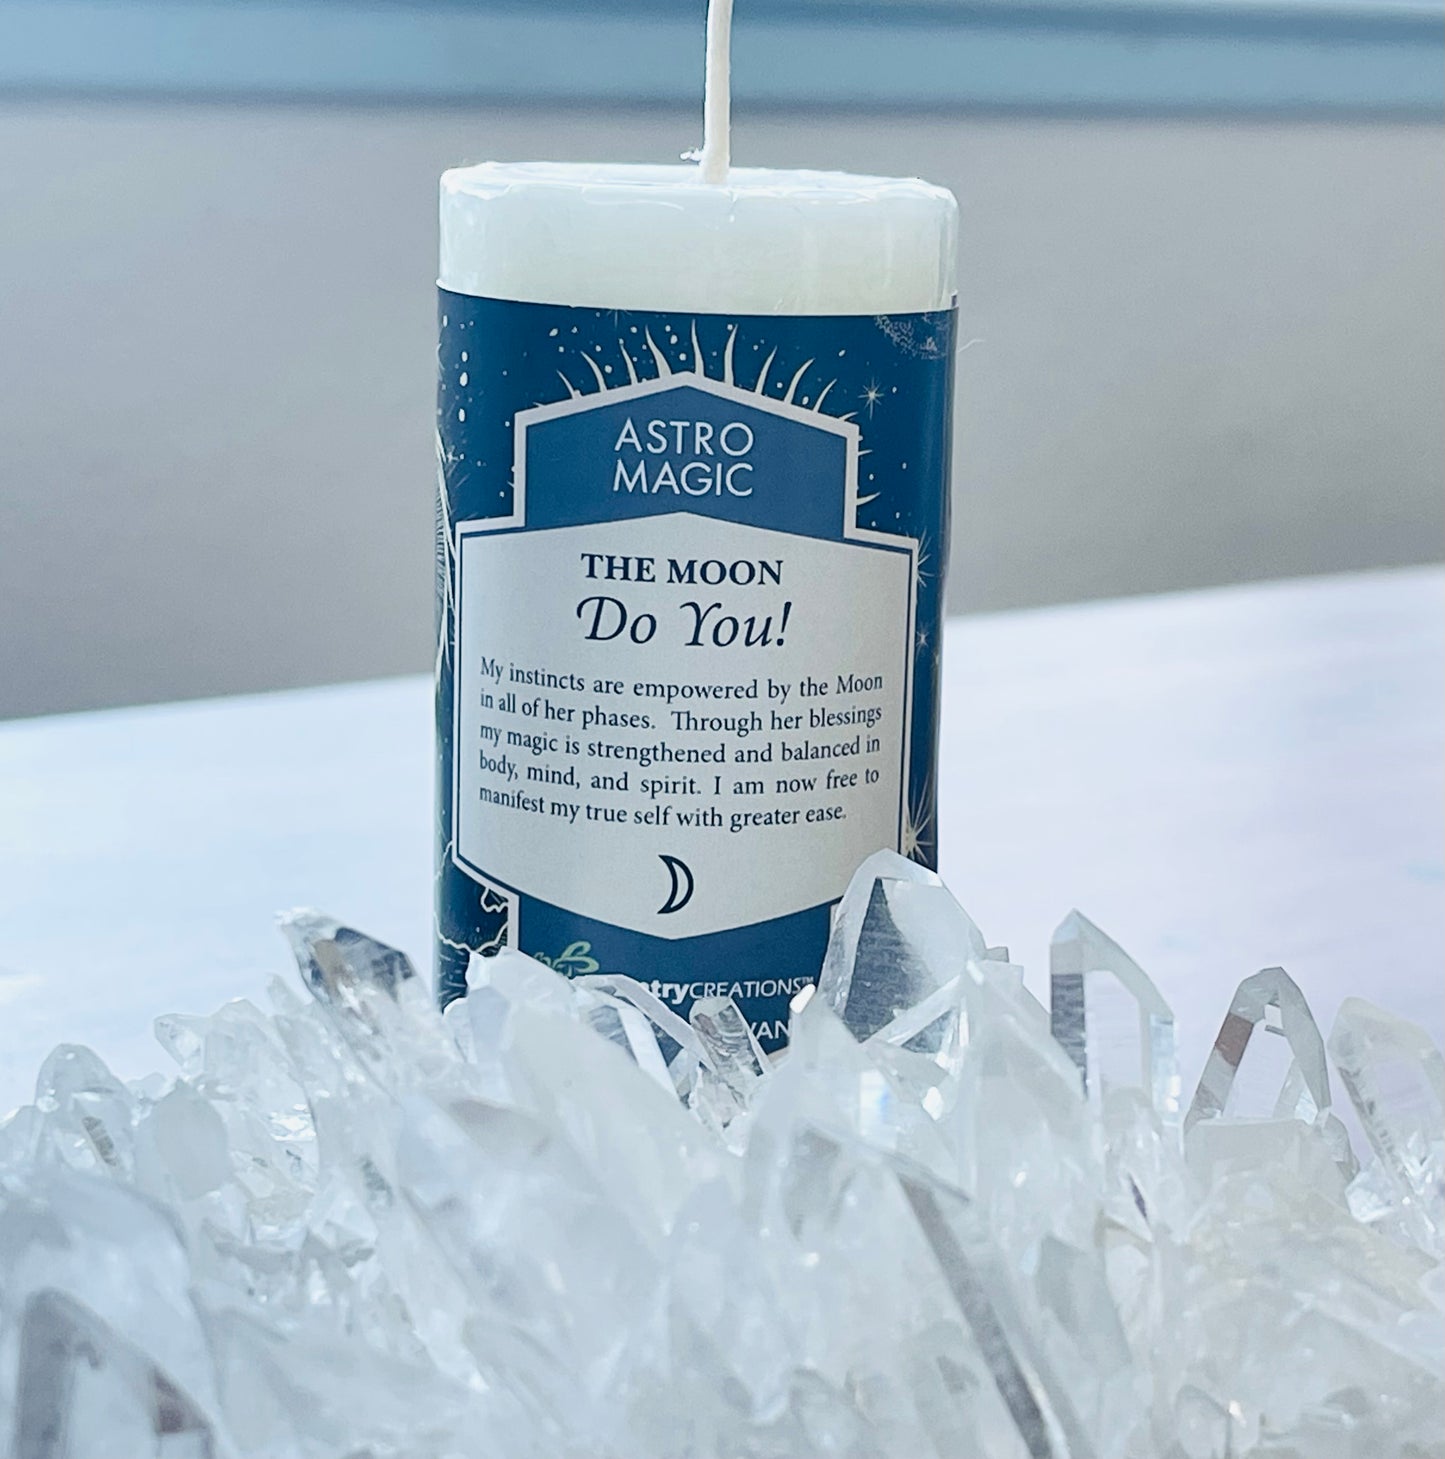 Witches' Brew Candles